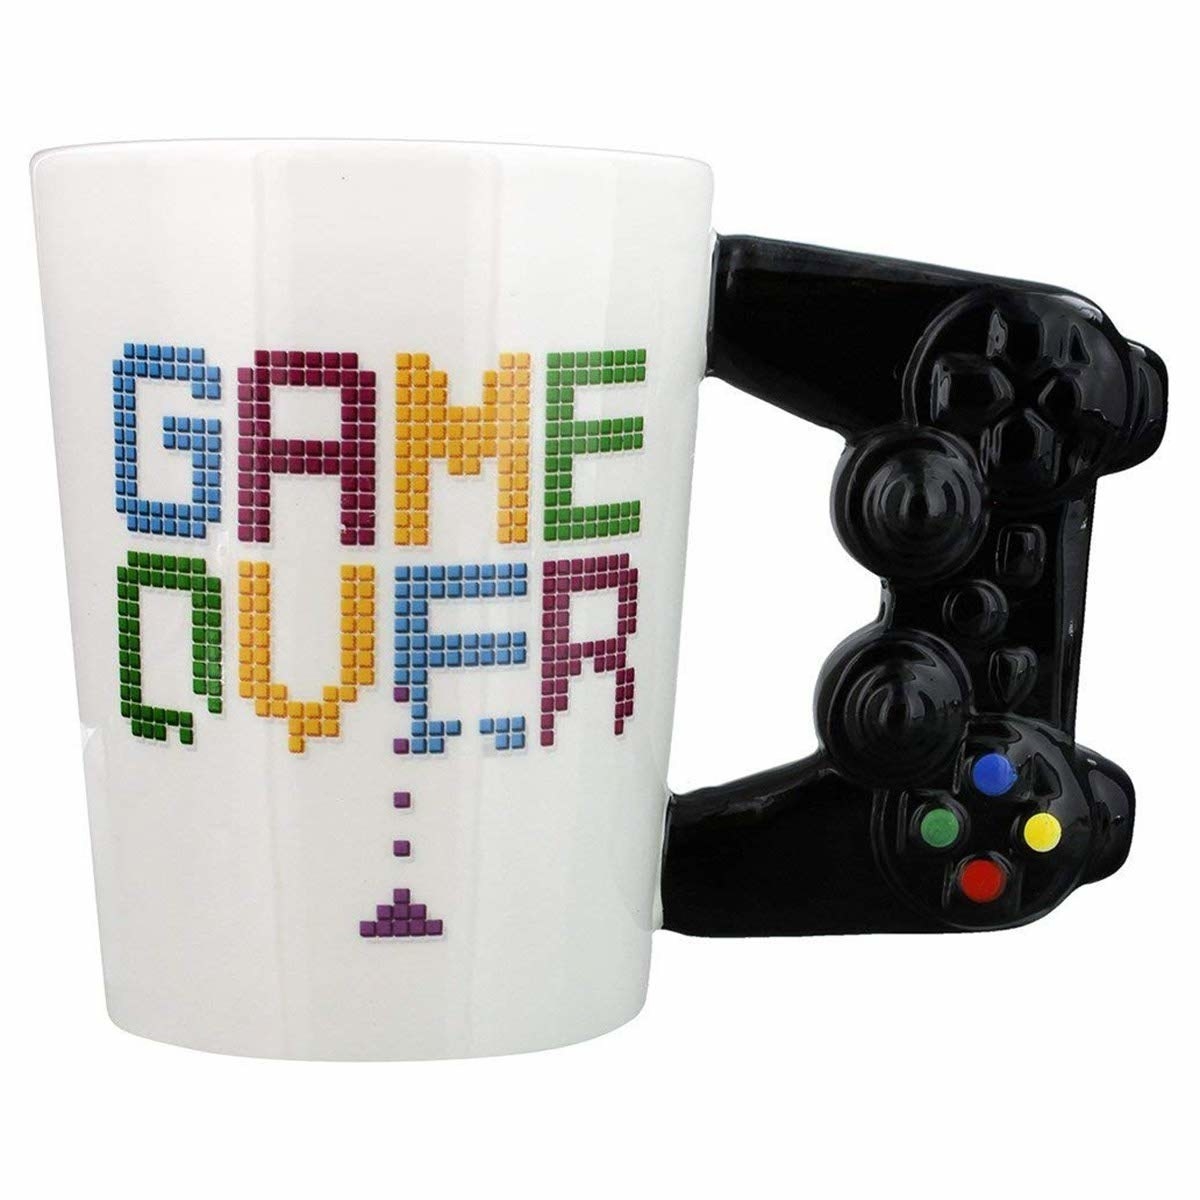 A white mug that says &#x27;Game Over&#x27; in a Tetris-inspired font and the handle of the mug is shaped like a game controller